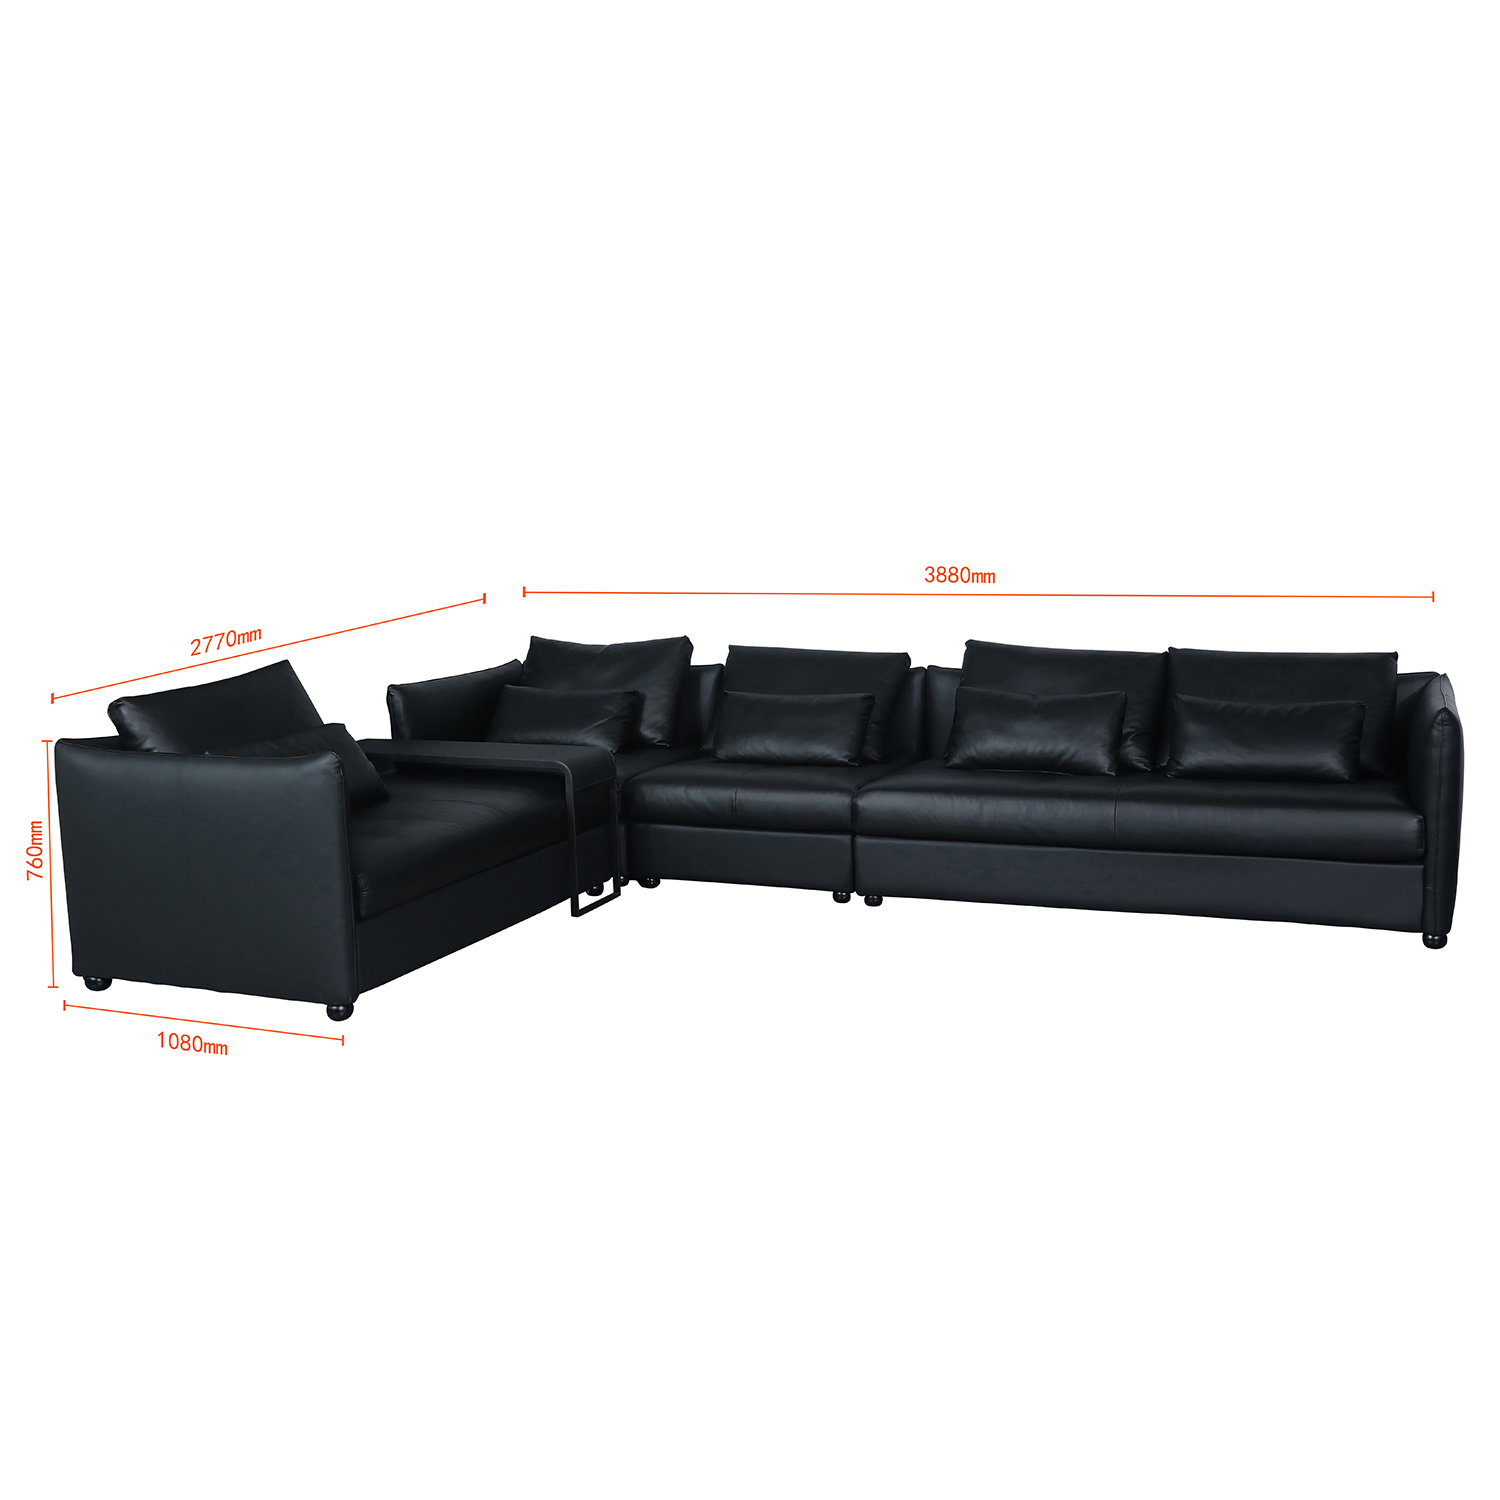 China Factory Modern Luxury Design Sectional Leather Sofa Living Room Furniture